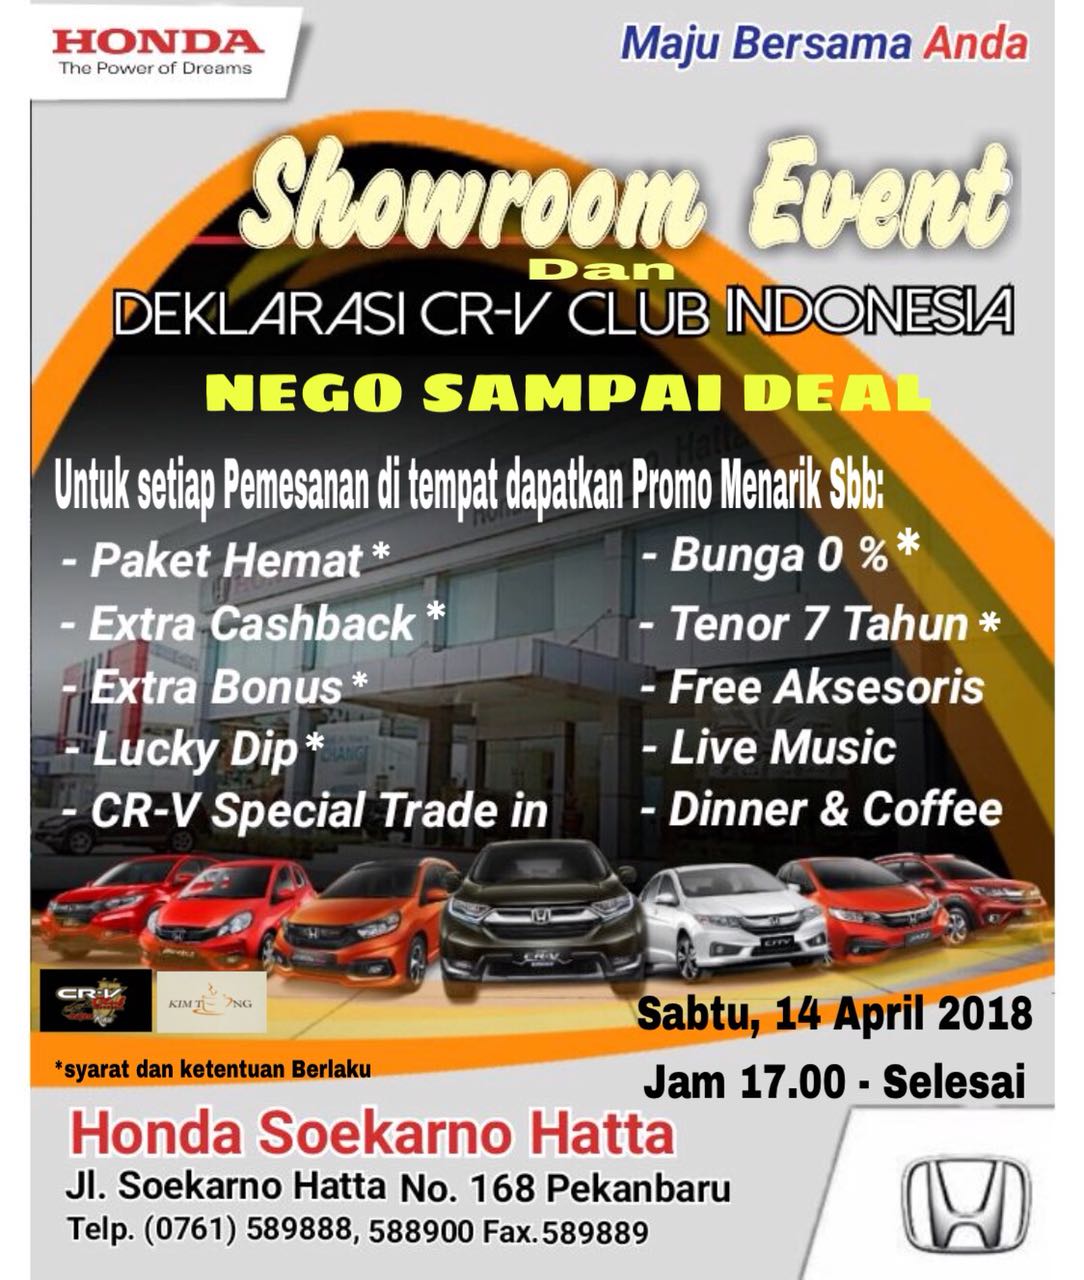 Promo showroom event HSH